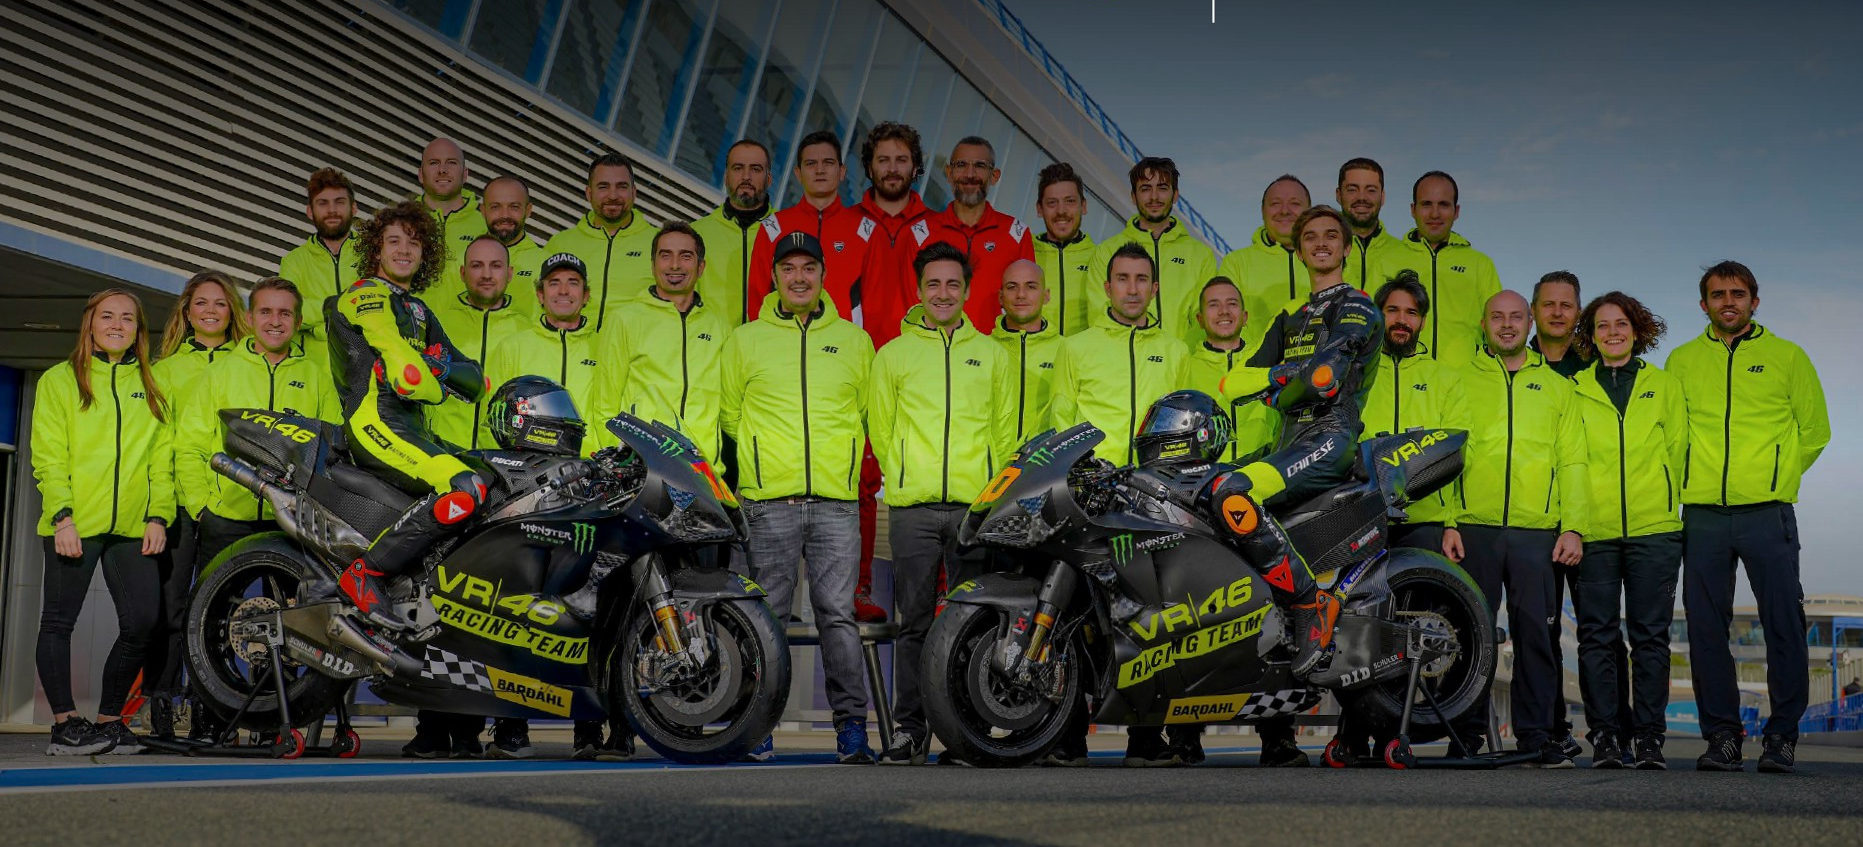 MotoGP: More About The Mooney VR46 Racing Team - Roadracing World ...